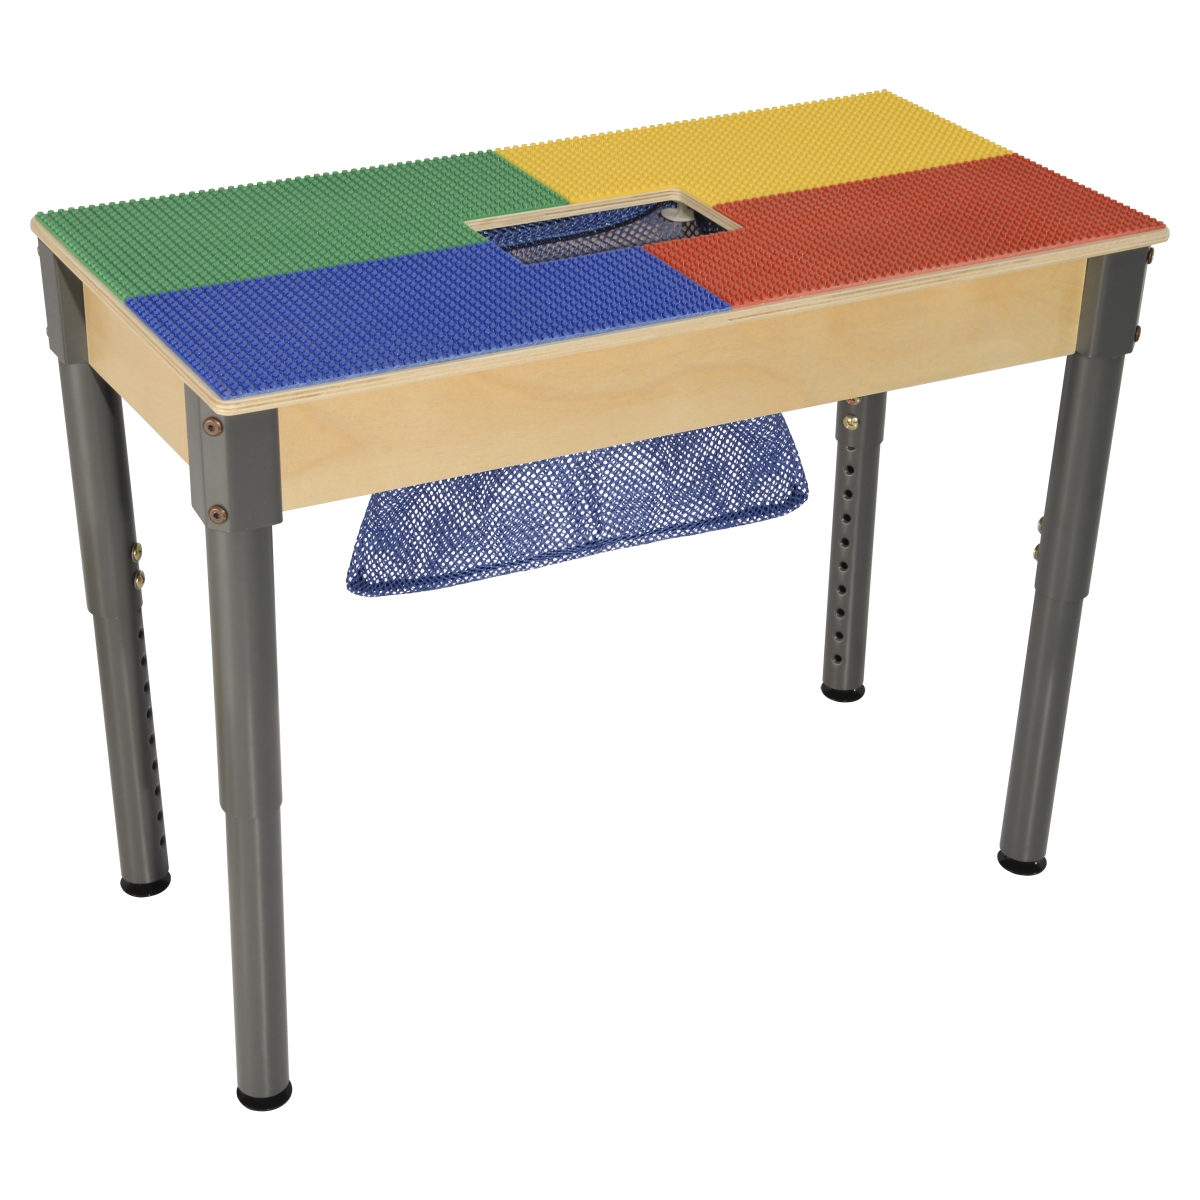 Tp1631sgna1217 12 X 17 In. Lego Compatible Rectangle Table With Adjustable Legs, Multi Color